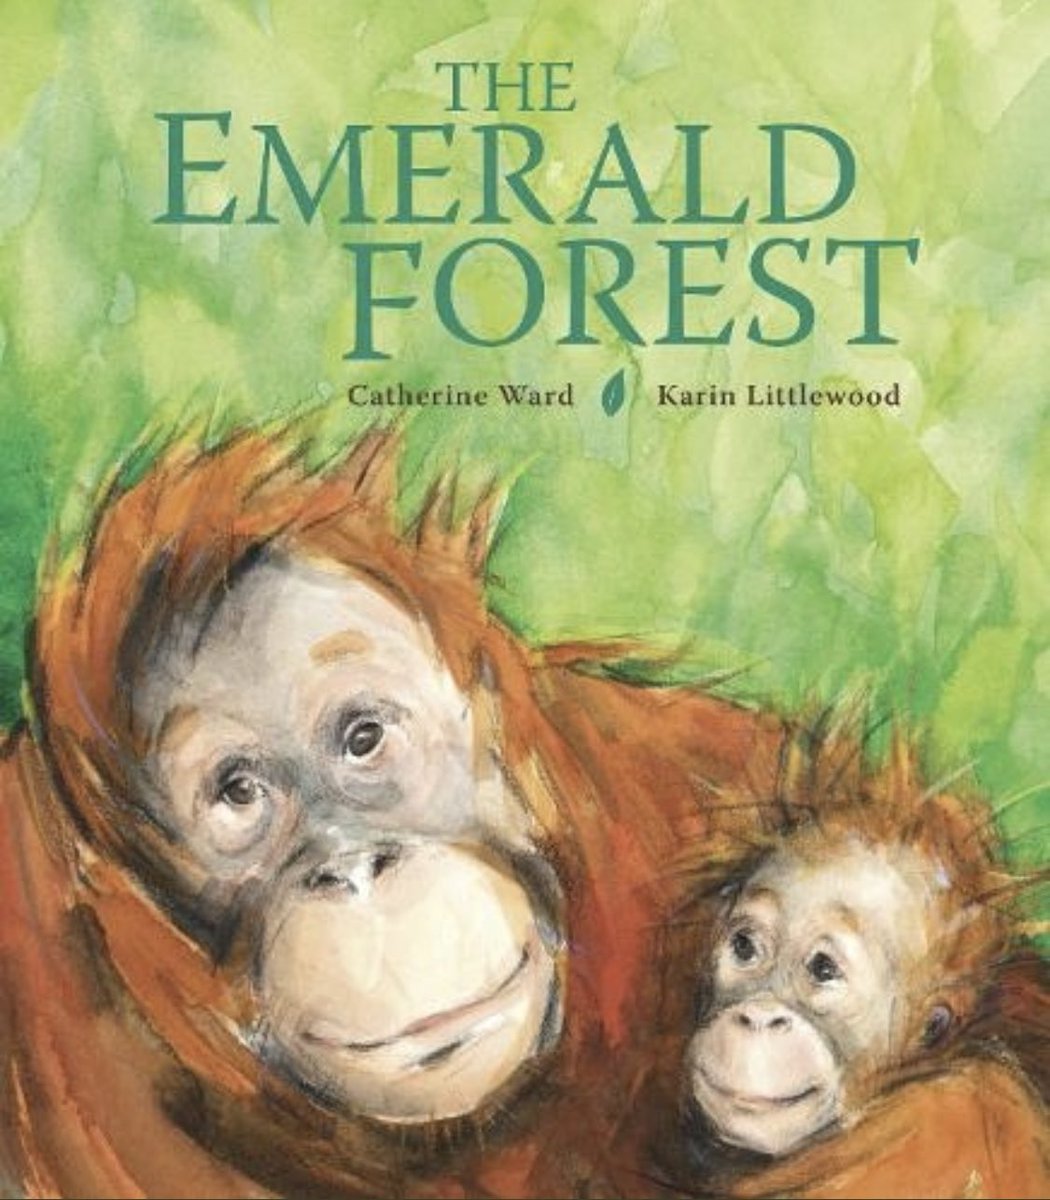 There’s a great new review on the #BooksThatHelp site for The Emerald Forest by @CatherineWard0 and #KarinLittlewood. 

booksthathelp.co.uk/the-environment

@ClareHelenWelsh